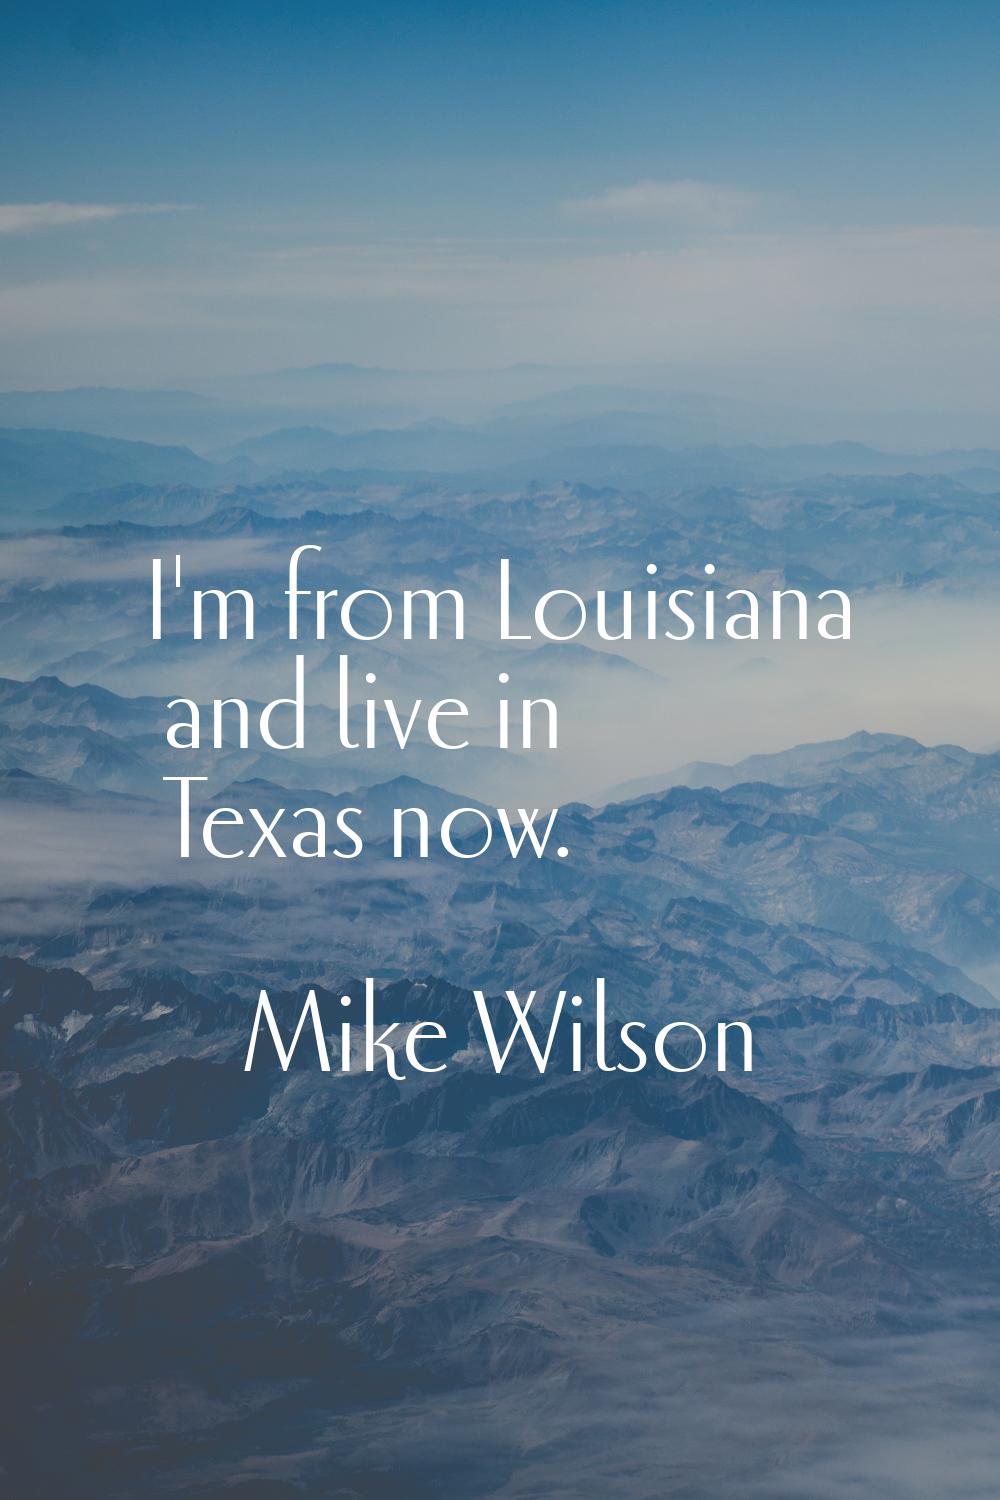 I'm from Louisiana and live in Texas now.